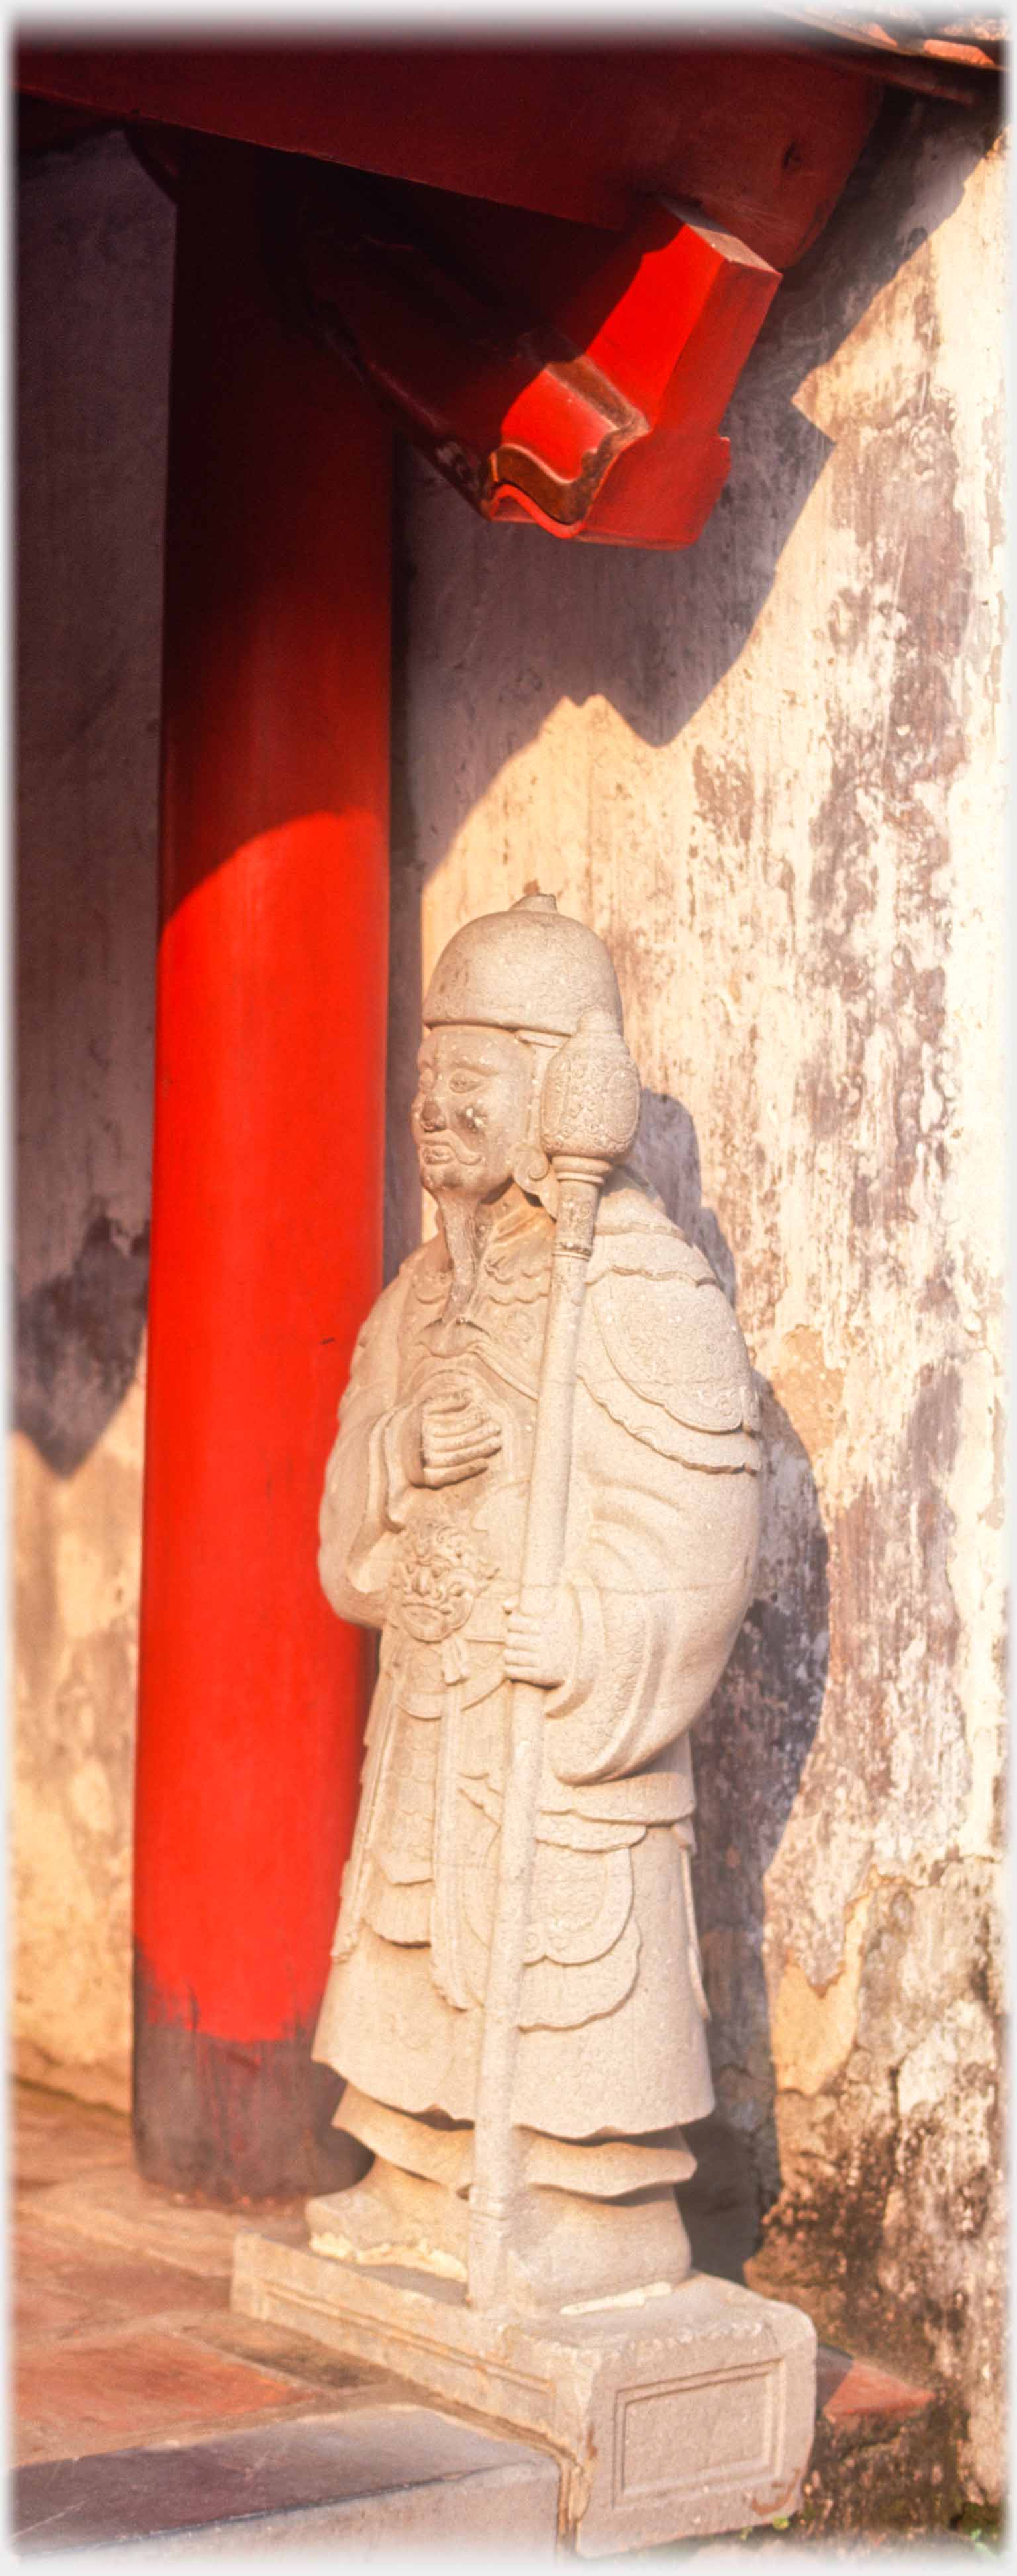 Stone figure in elaborate clothes holding mace.